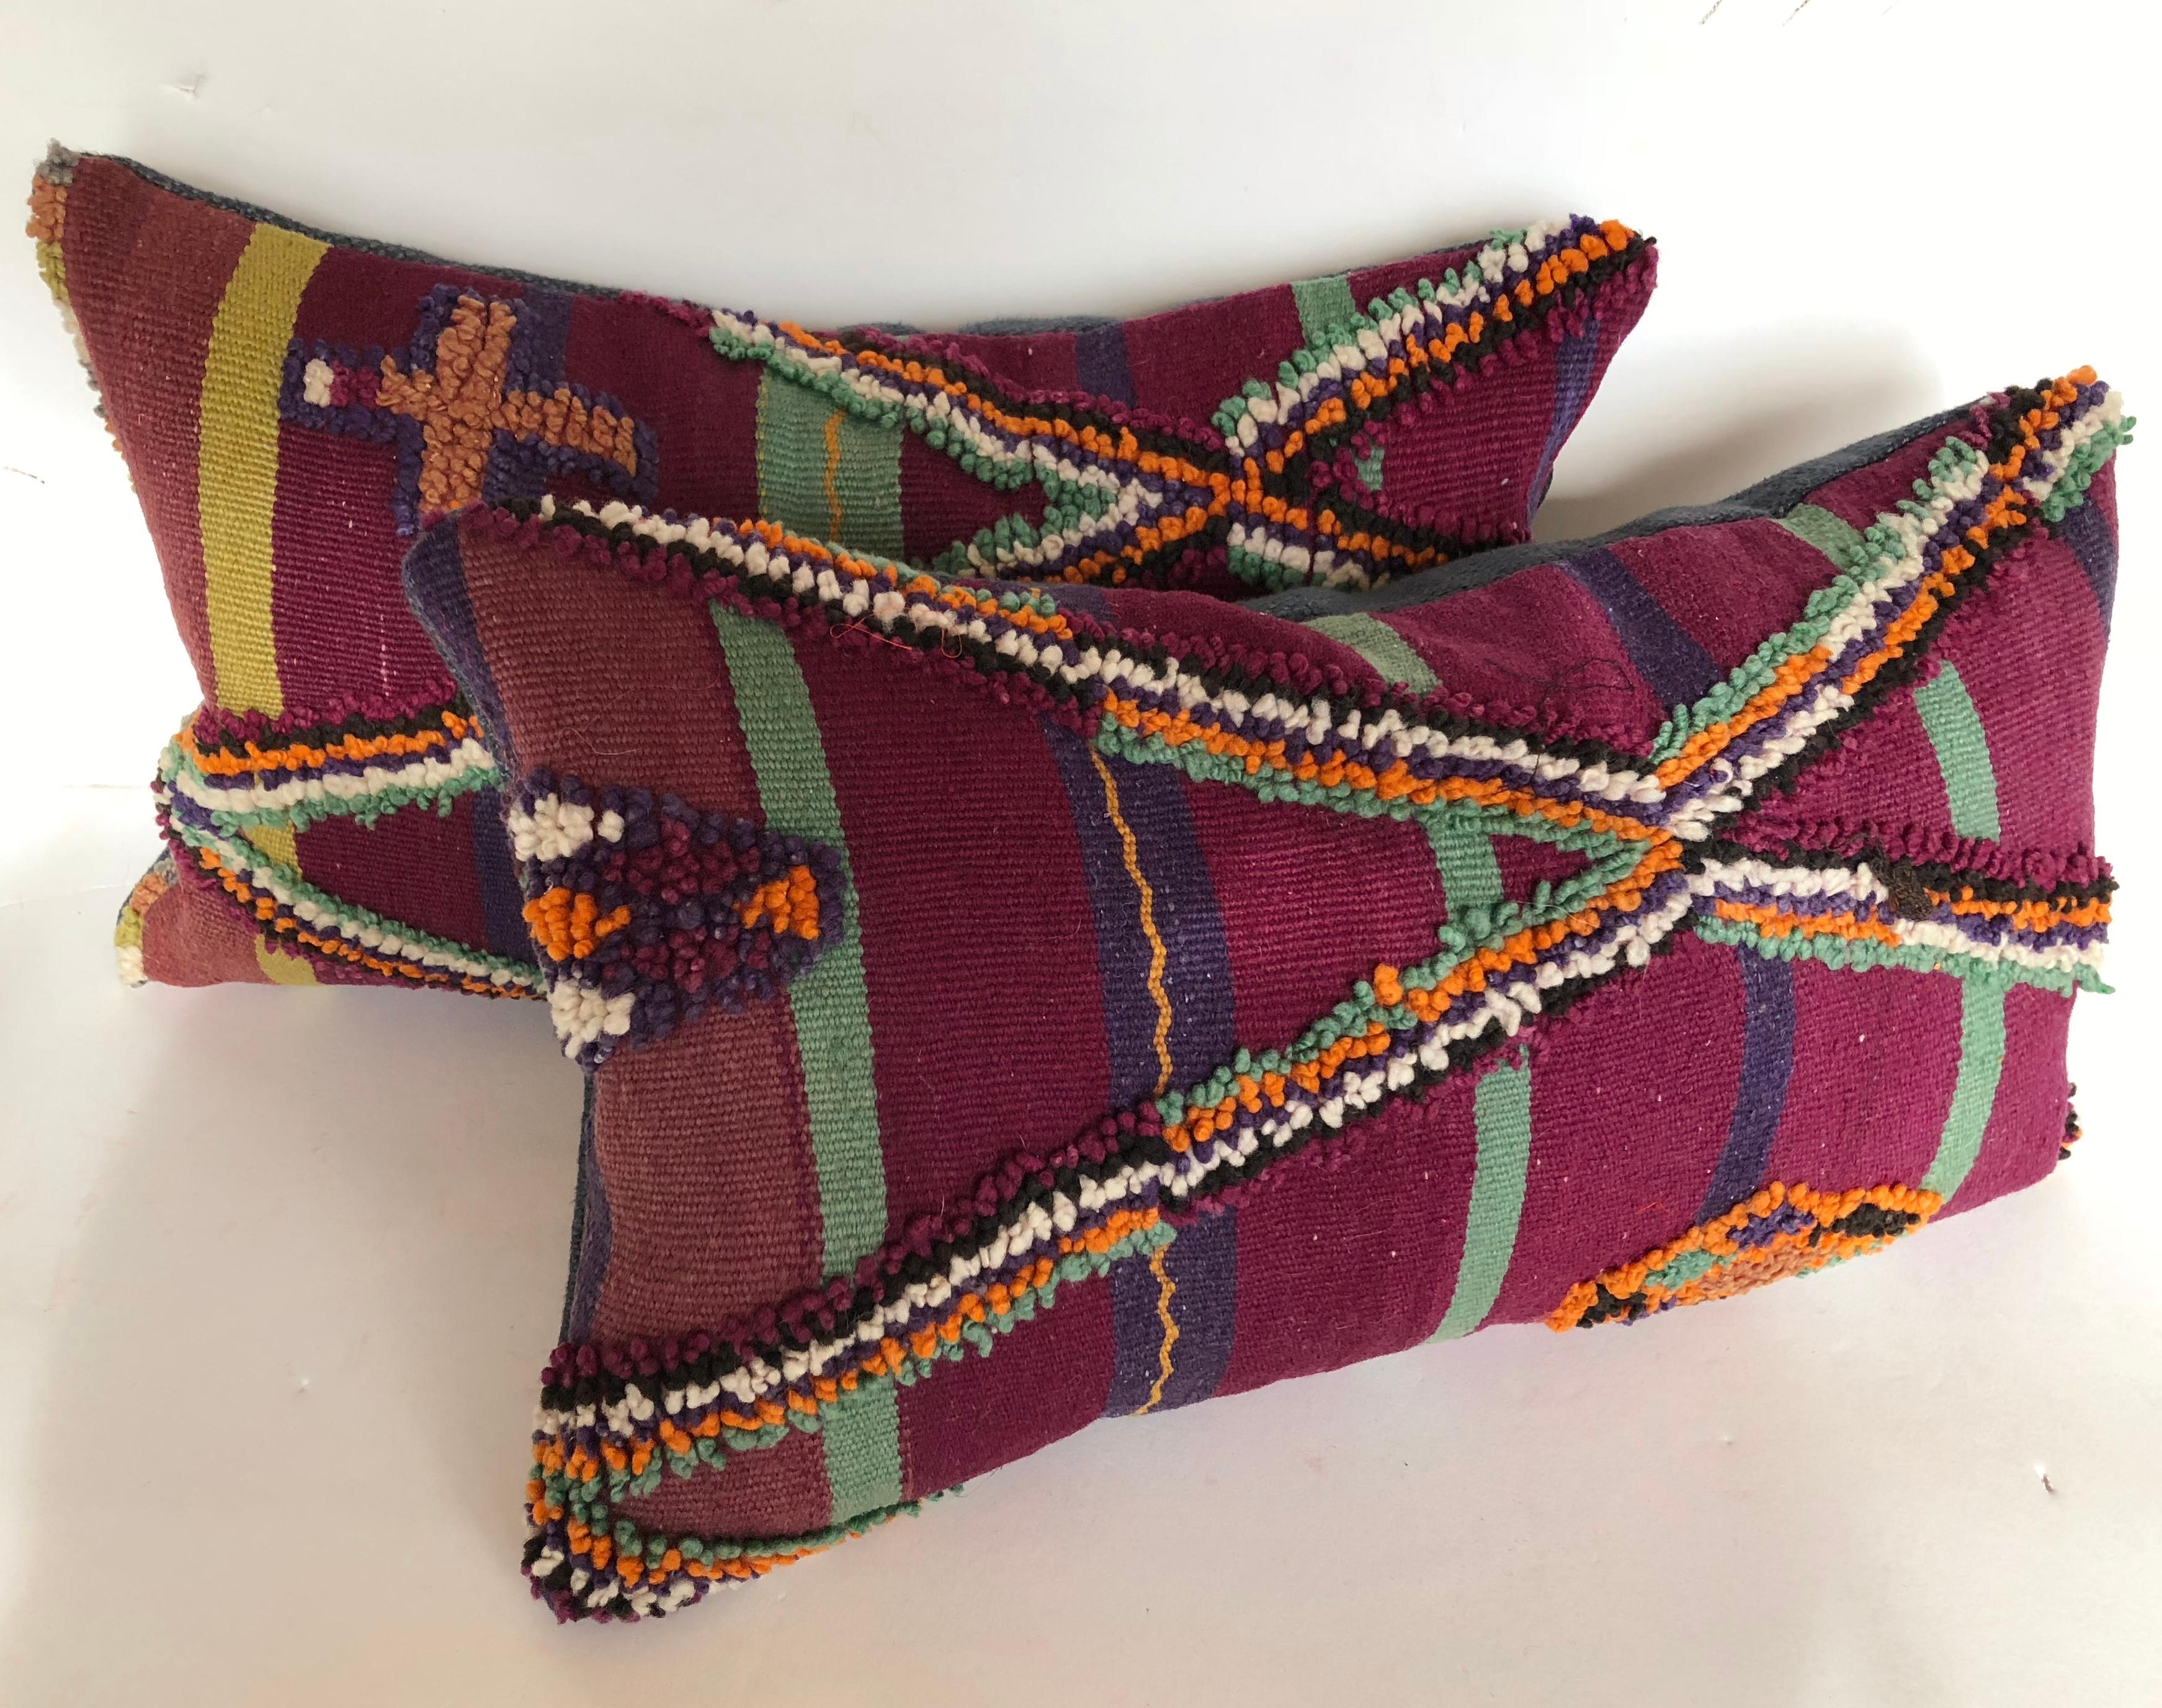 Pair of custom pillows cut from a vintage hand loomed wool Moroccan Berber rug from the Atlas Mountains. Wool is soft and lustrous with stripes and tufted tribal designs. Pillows are backed in a linen blend, filled with inserts of 50/50 down and